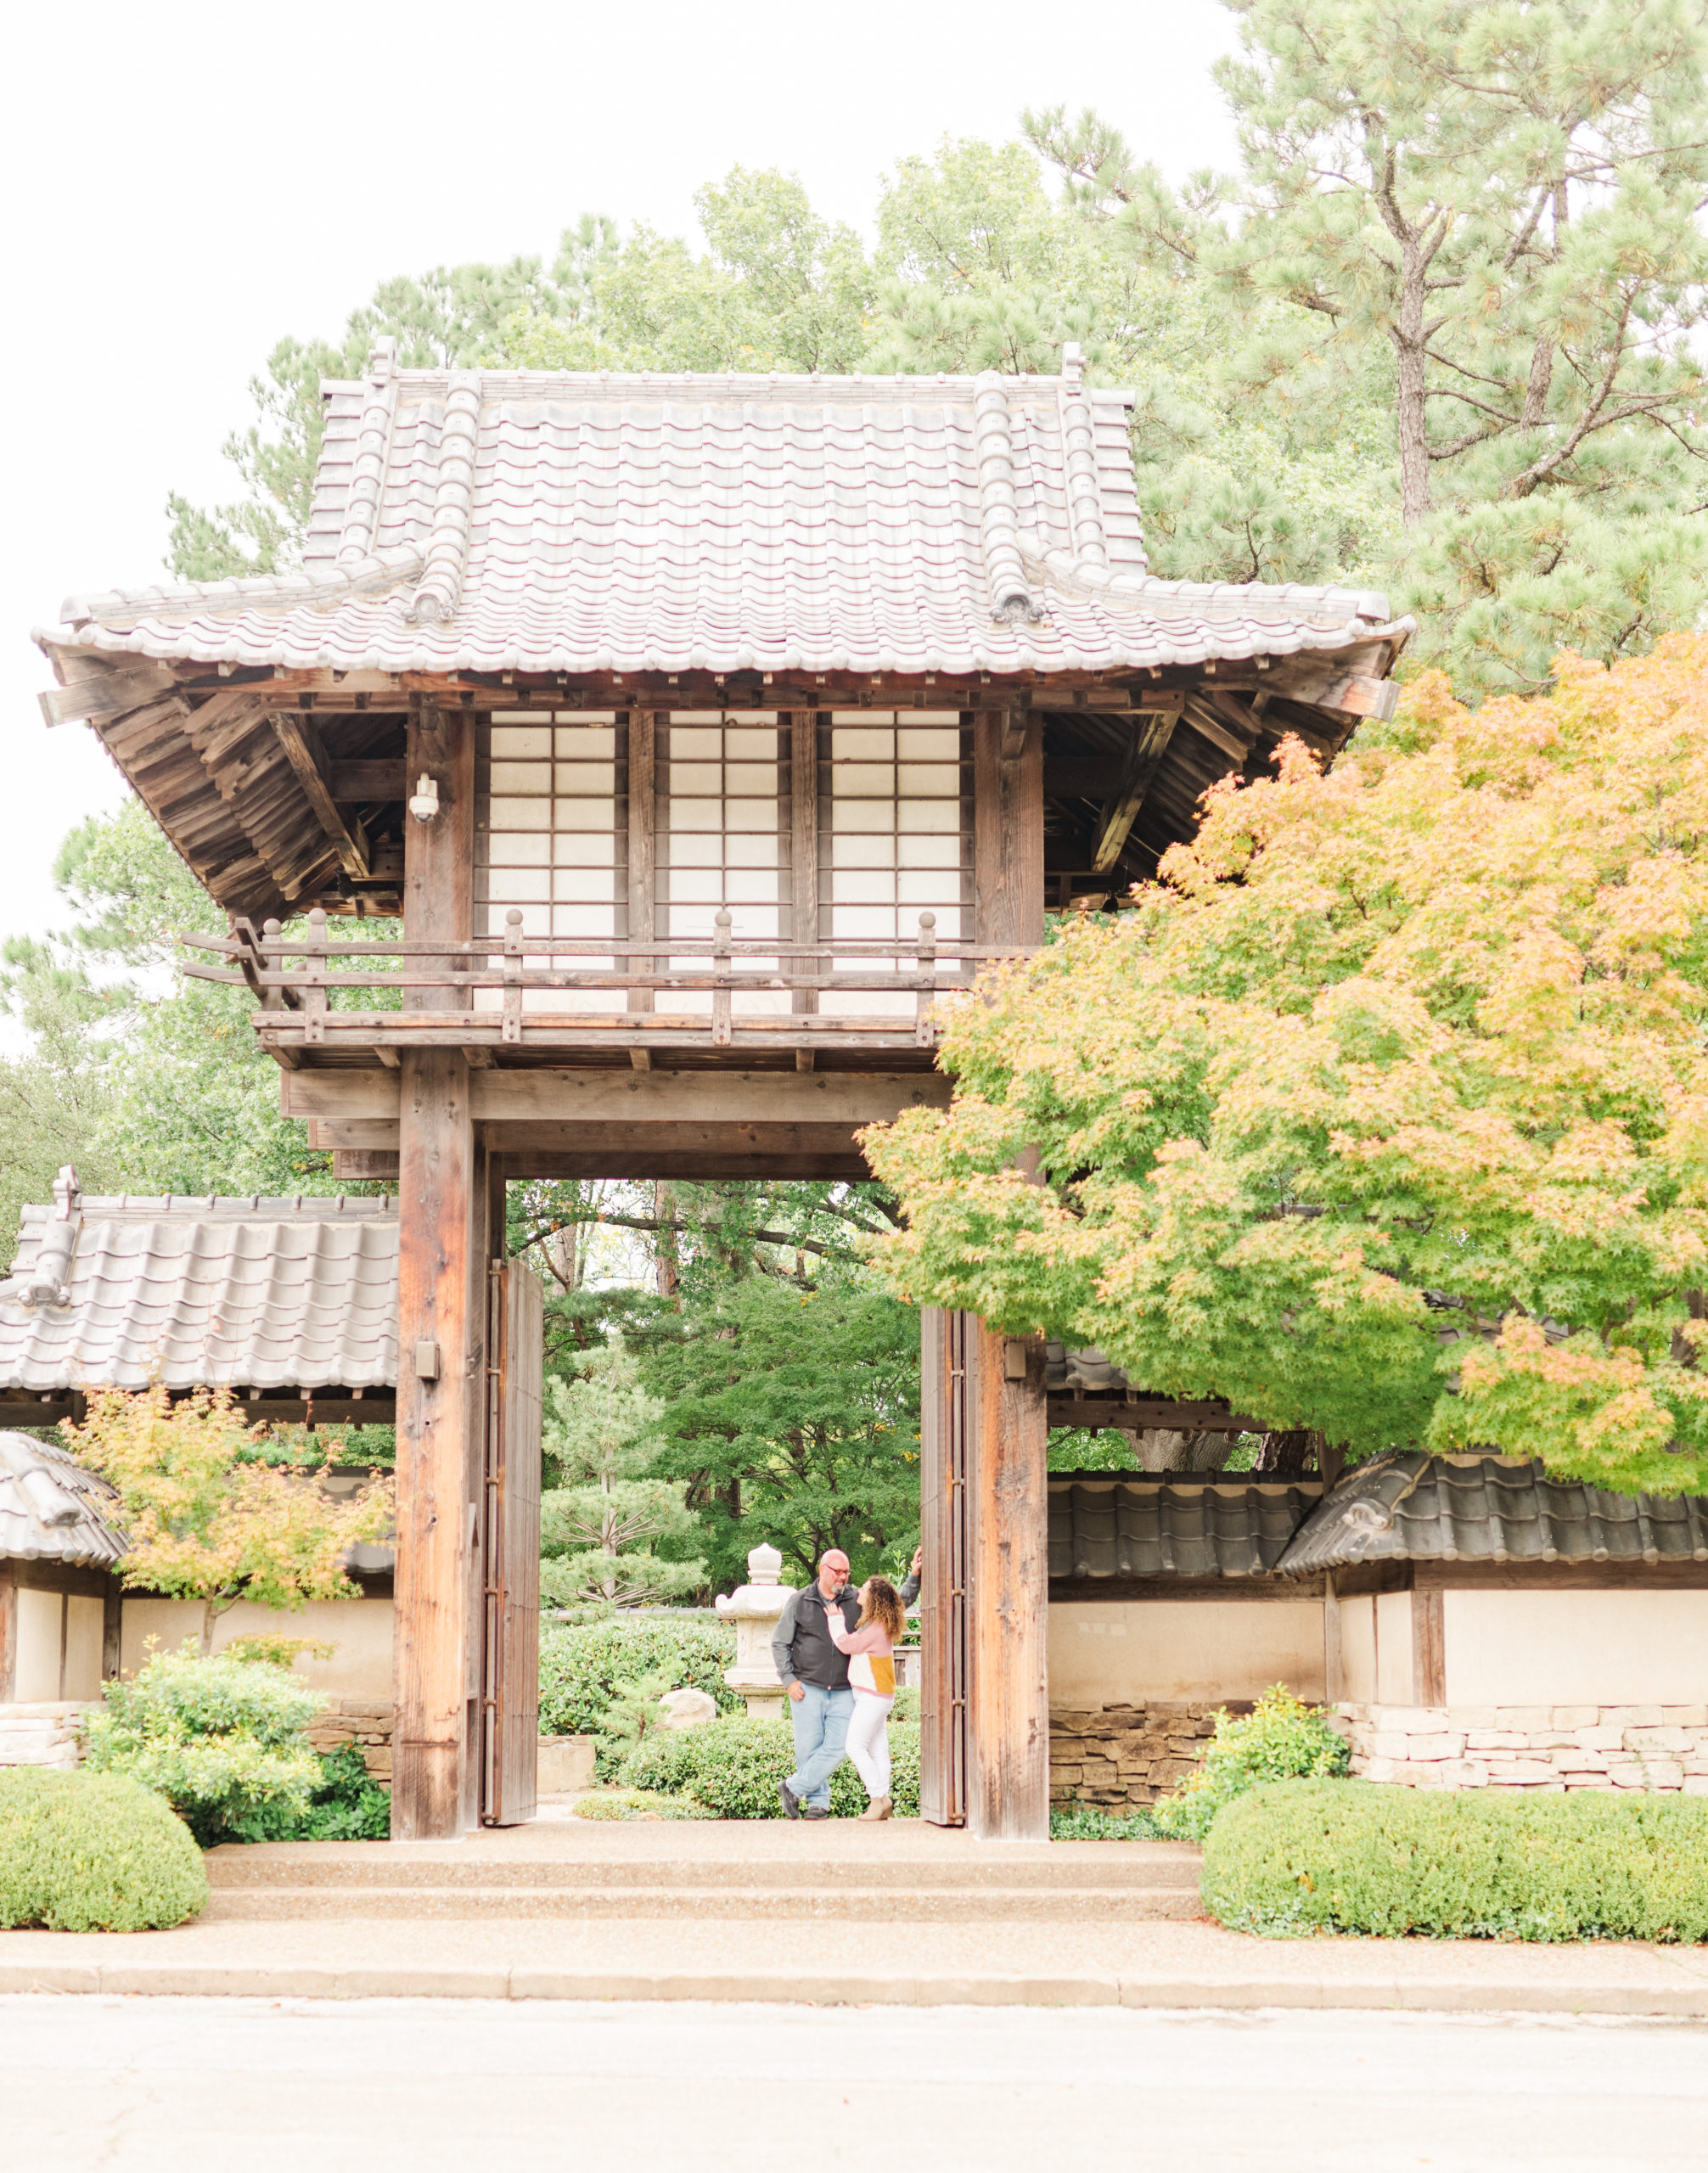 Couple under doorway at the Japanese Garden, Fort Worth Texas during engagement session